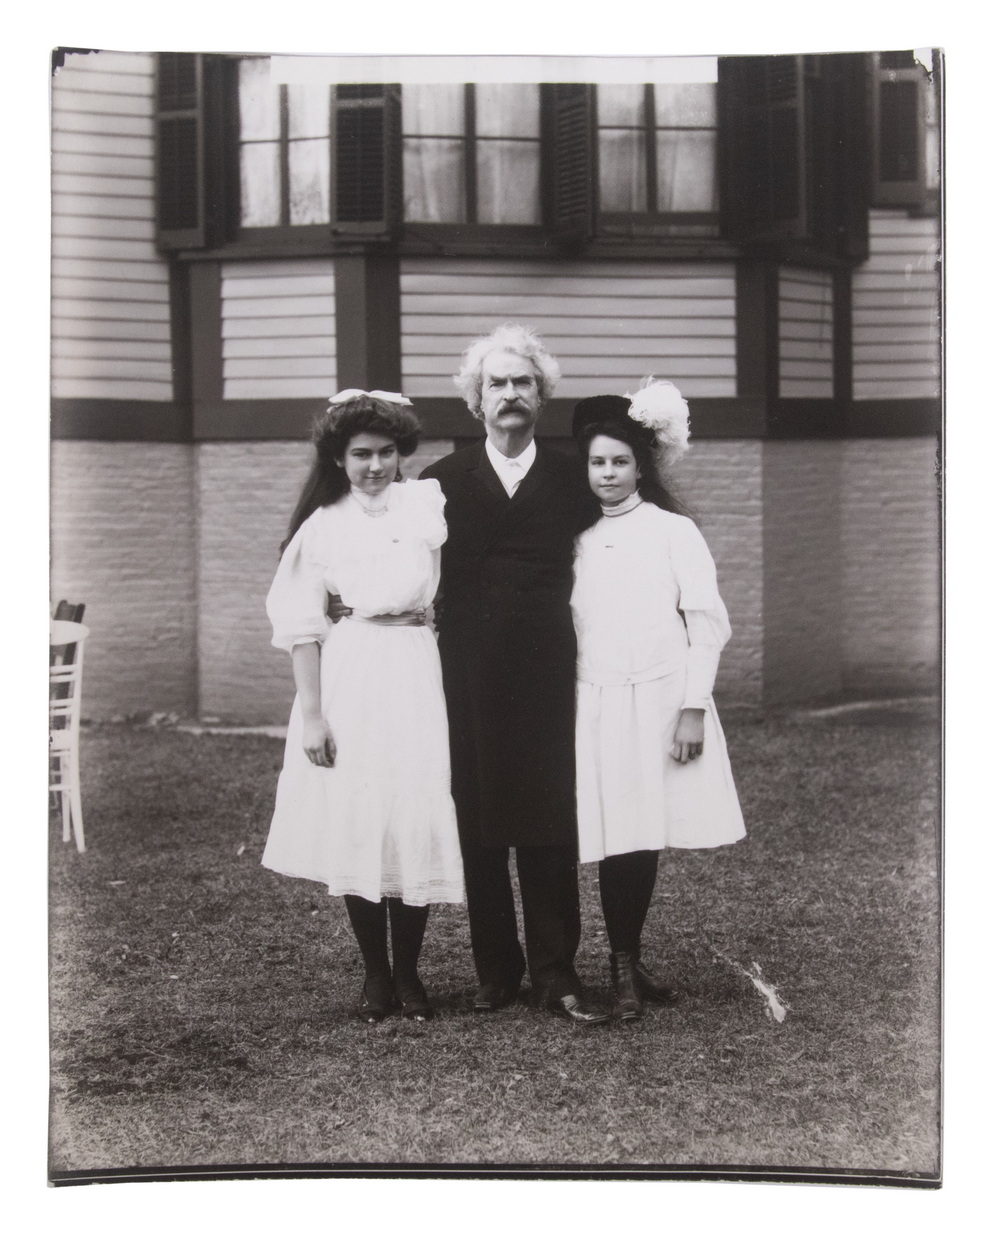 PACH BROS PHOTO OF MARK TWAIN WITH TWO